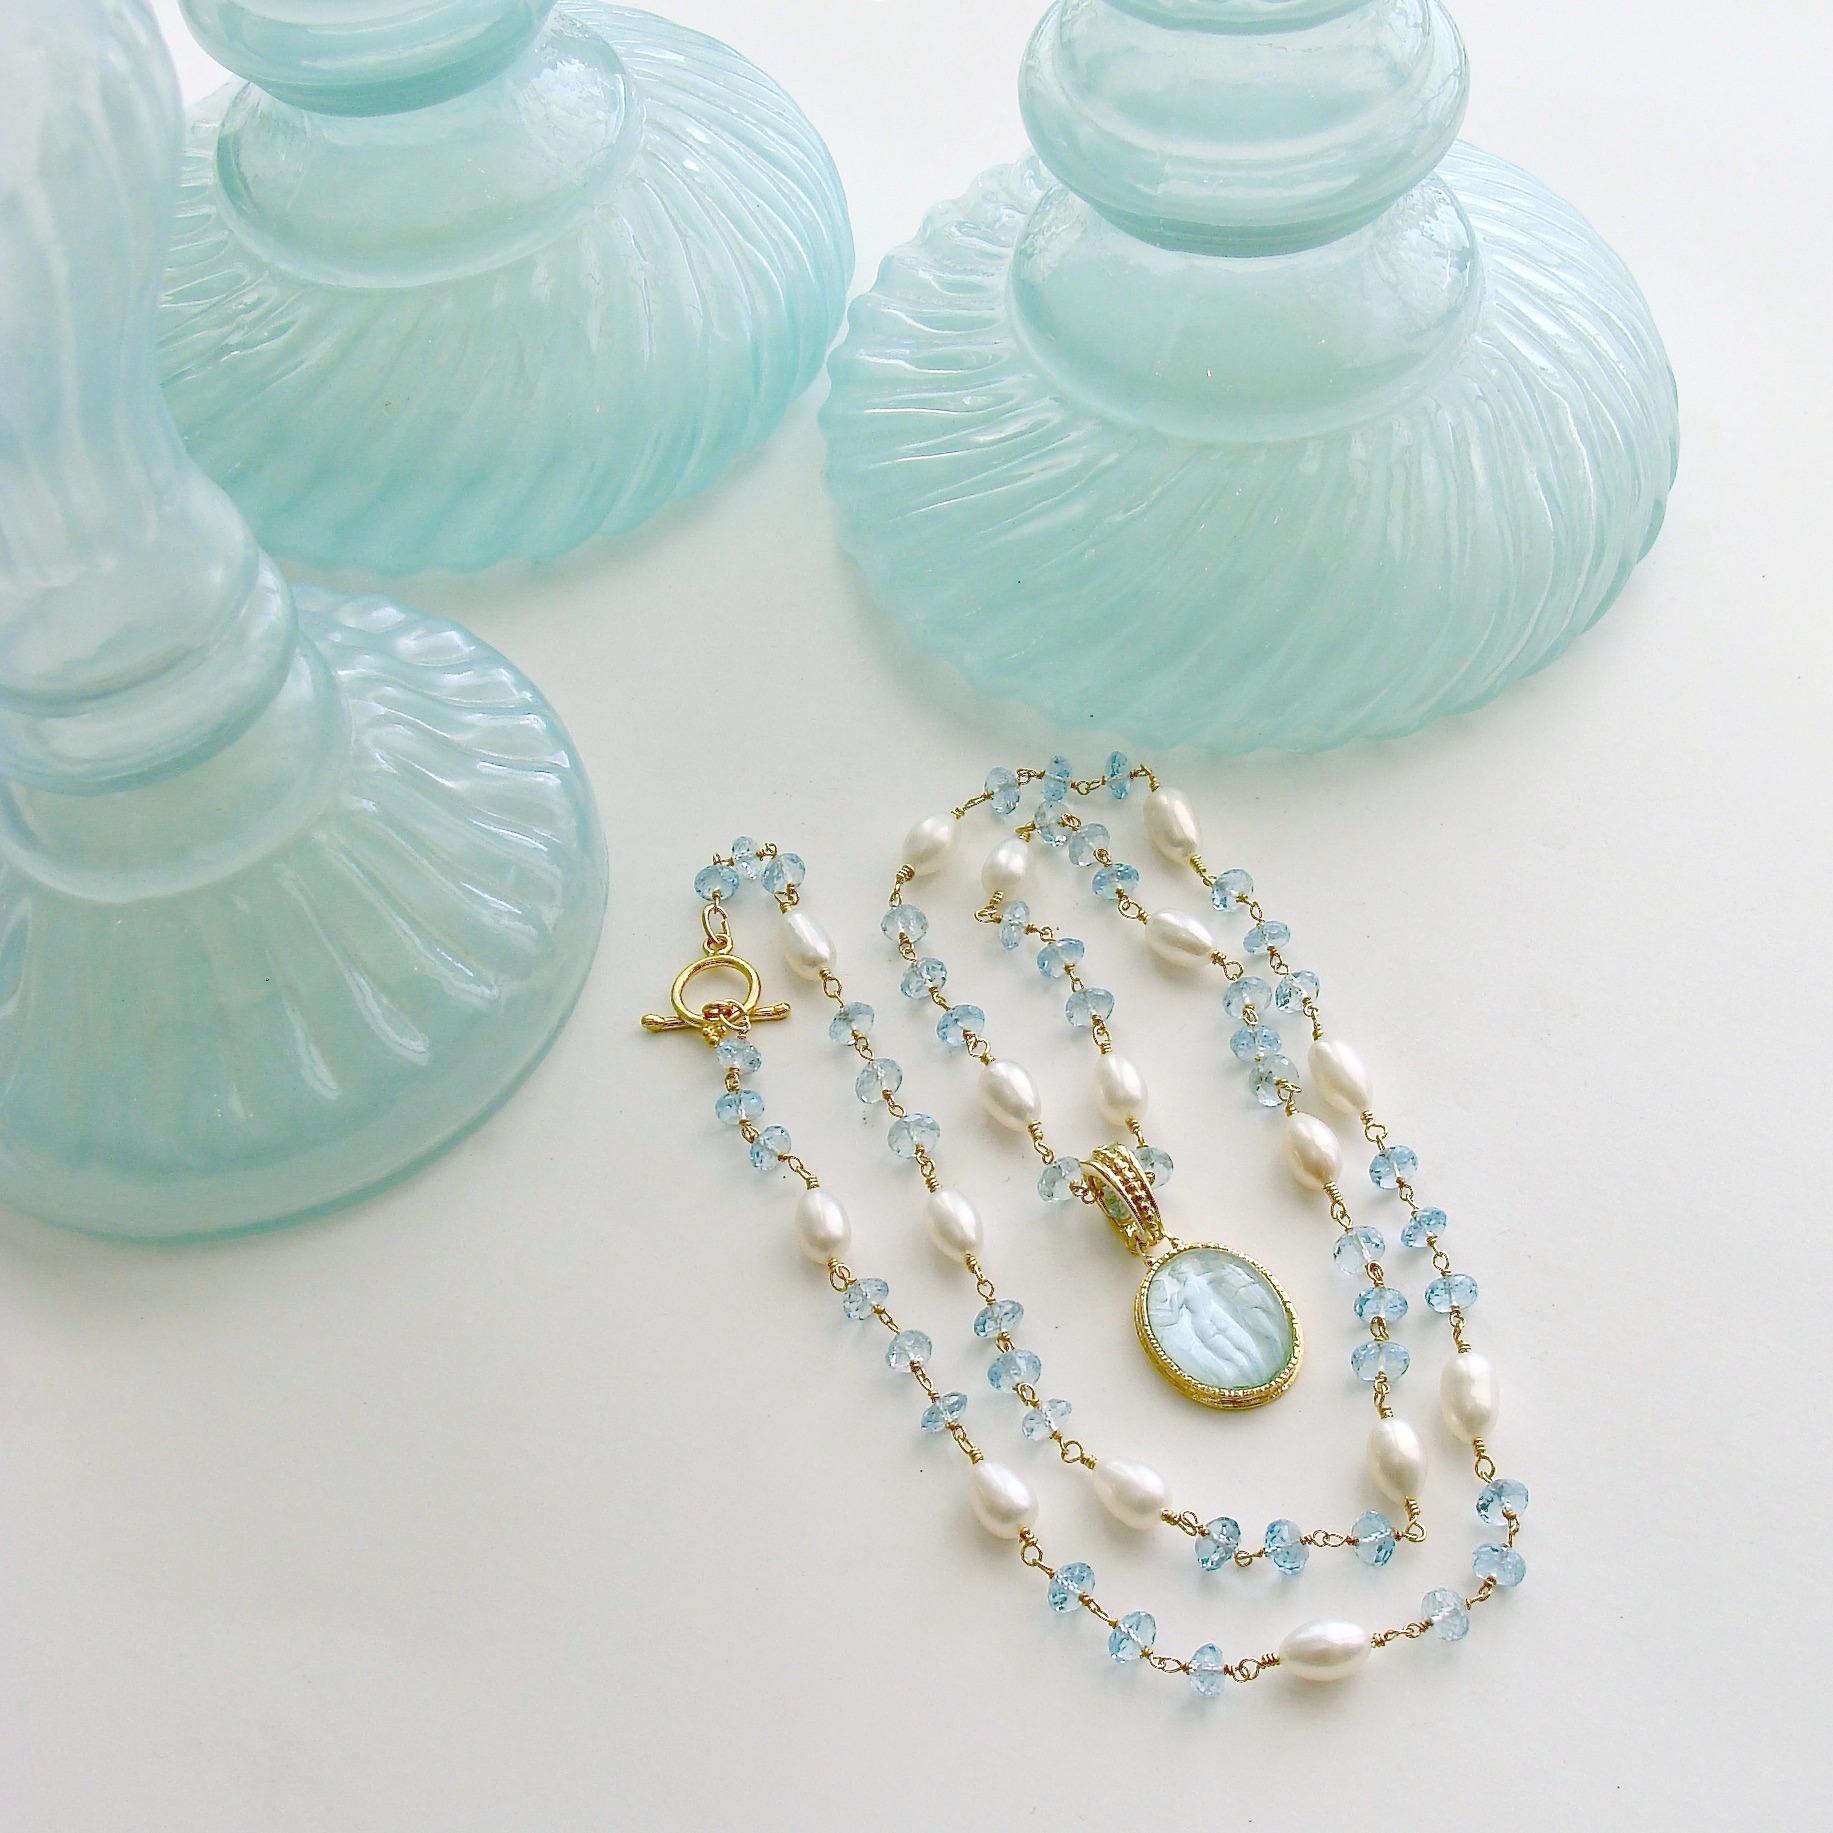 A long delicate necklace of hand-linked frothy blue topaz and creamy freshwater pearls, is perfectly coordinated with the powdery aqua color of a Venetian glass intaglio cameo pendant.  The subjects of the cameo intaglio are The Three Graces